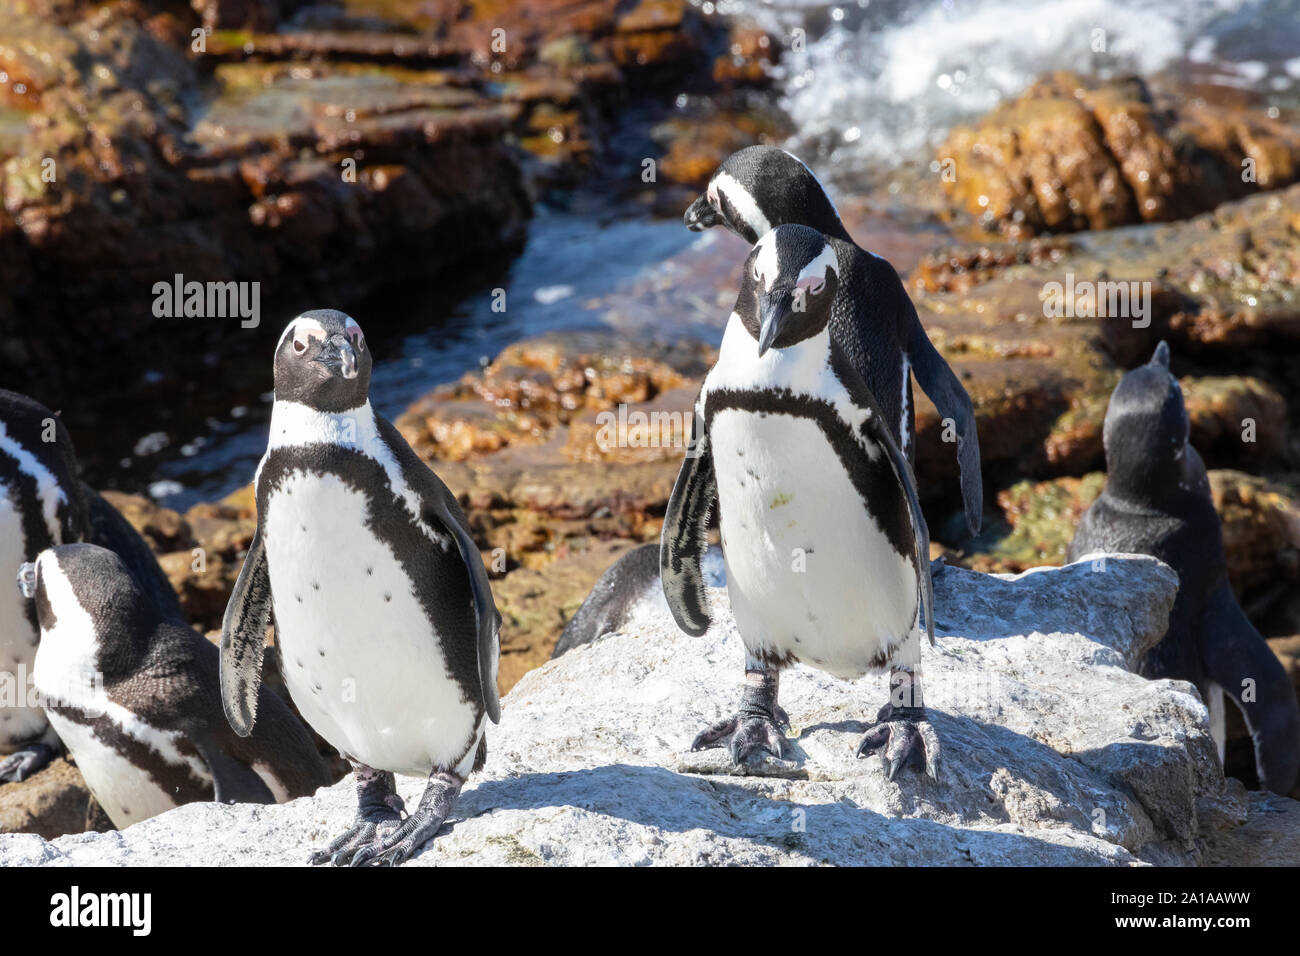 Endangered African Penguins (Spheniscus demersus), Stony Point Nature Reserve, Betty's Bay, South Africa Stock Photo